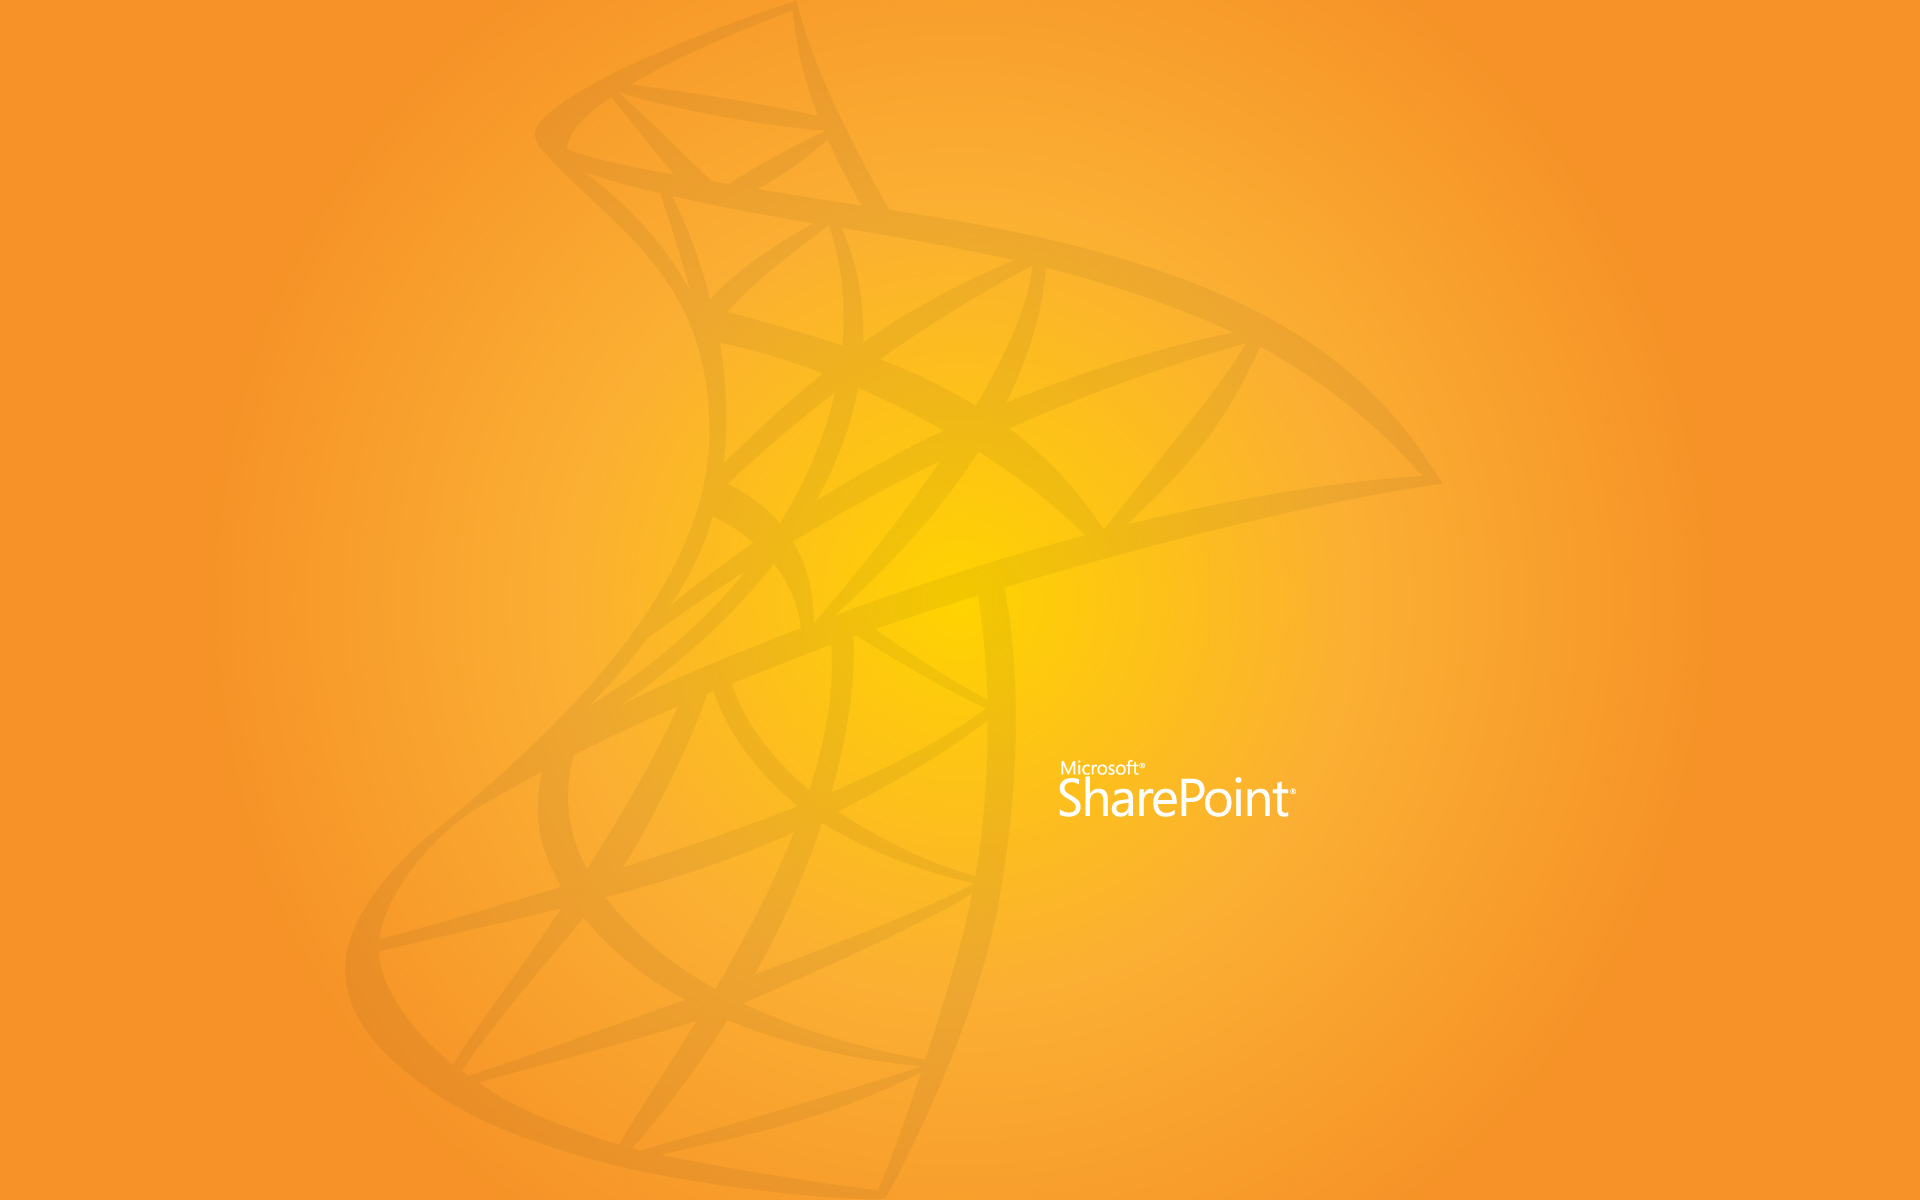 Read More About Our Sharepoint Capabilities